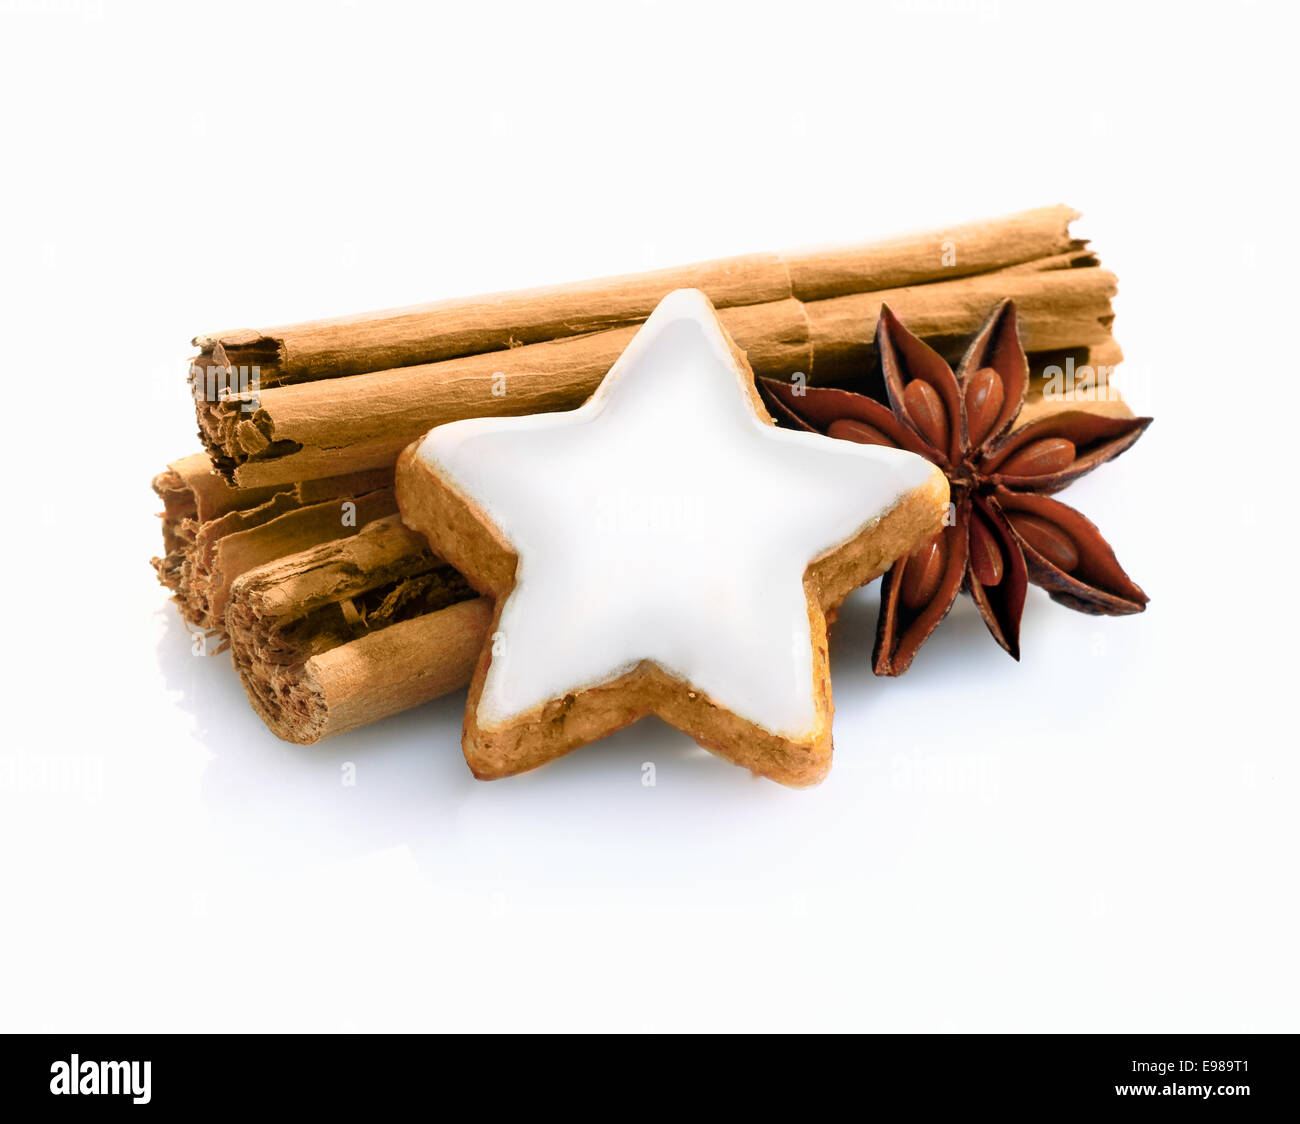 Christmas spice still life with cinnamon stiicks and star anise and a decorative star shaped iced biscuit on a white background Stock Photo